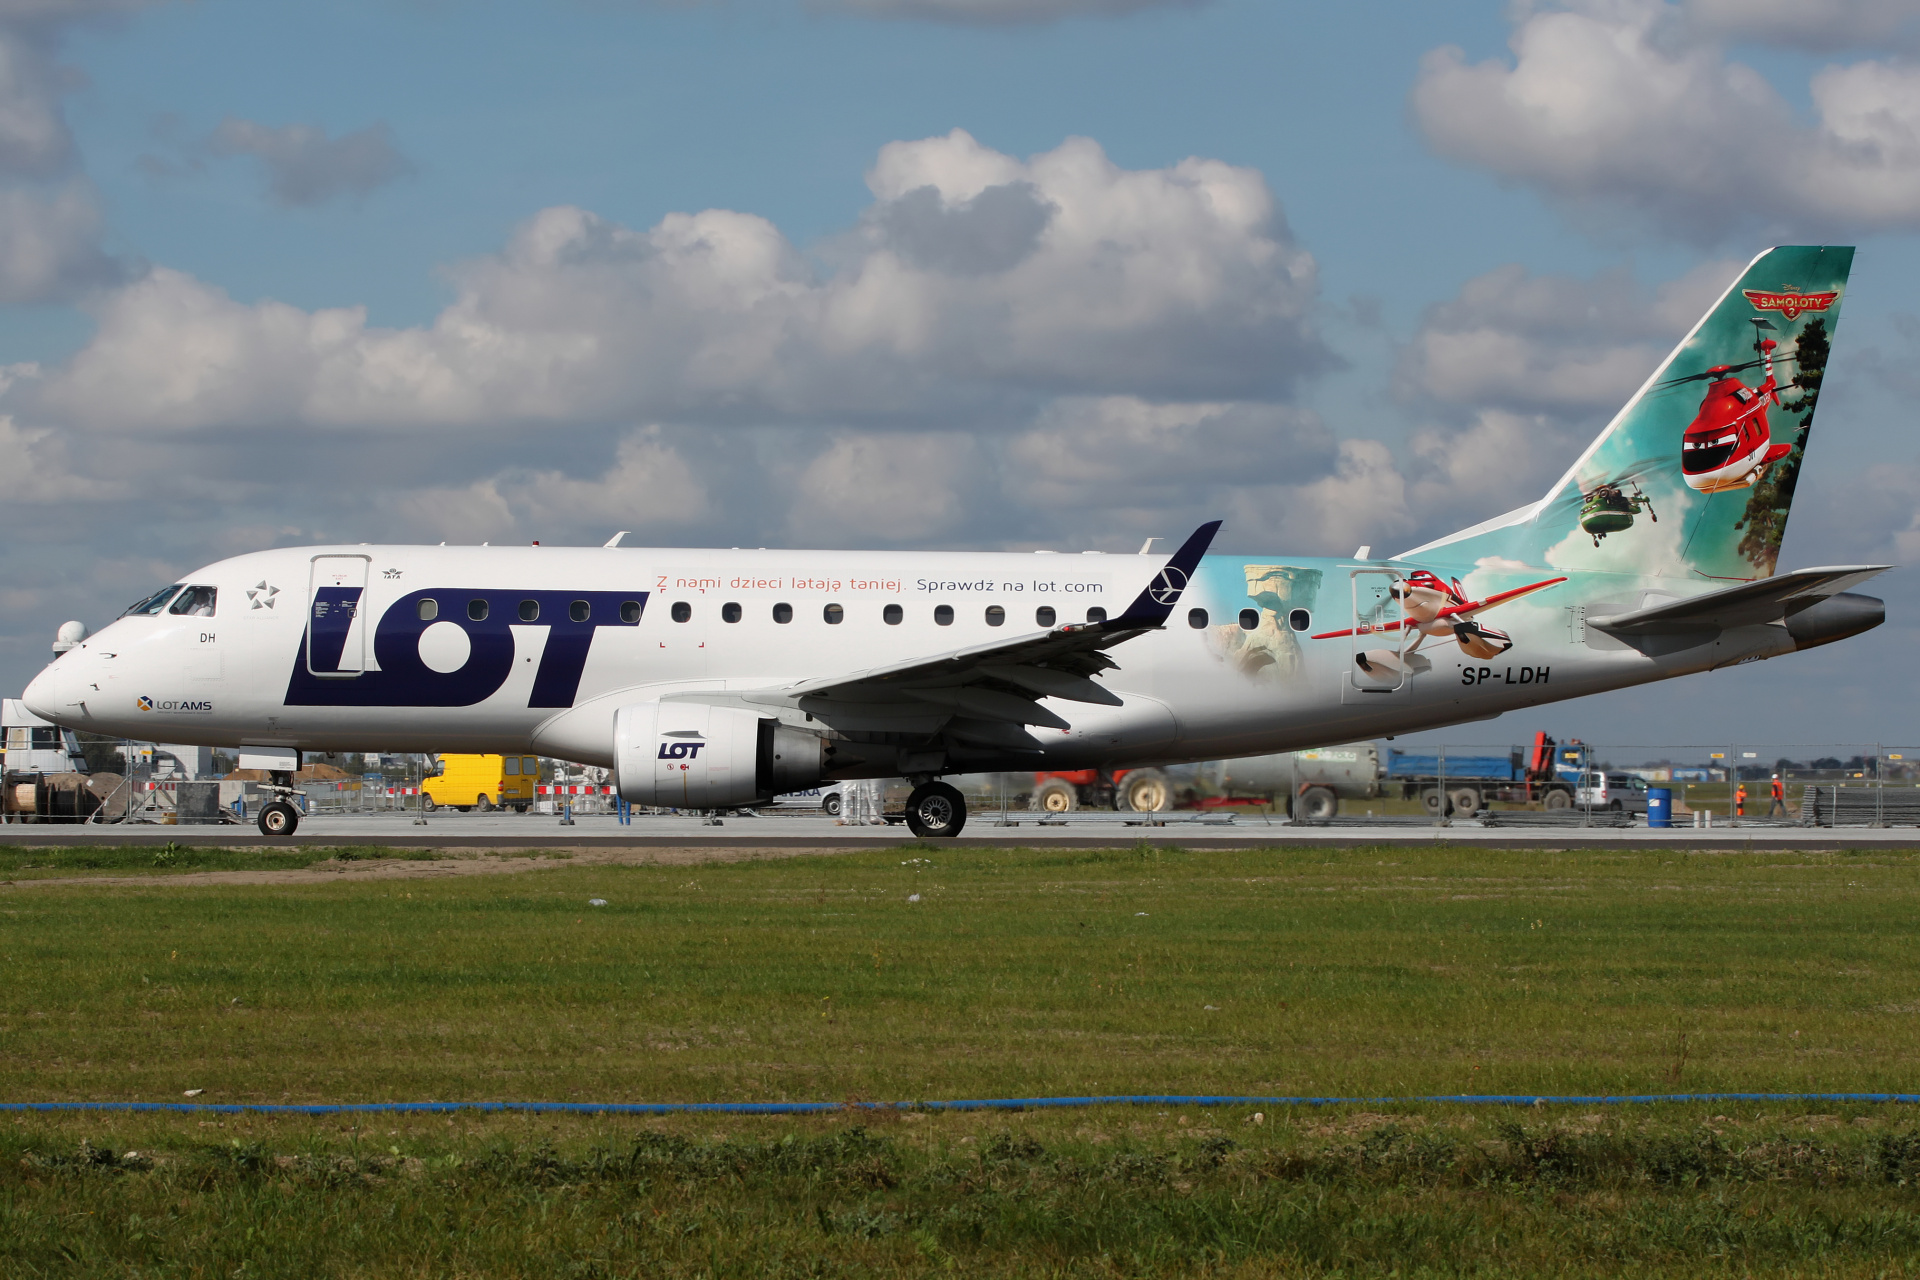 SP-LDH (Planes 2 livery) (Aircraft » EPWA Spotting » Embraer E170 » LOT Polish Airlines)